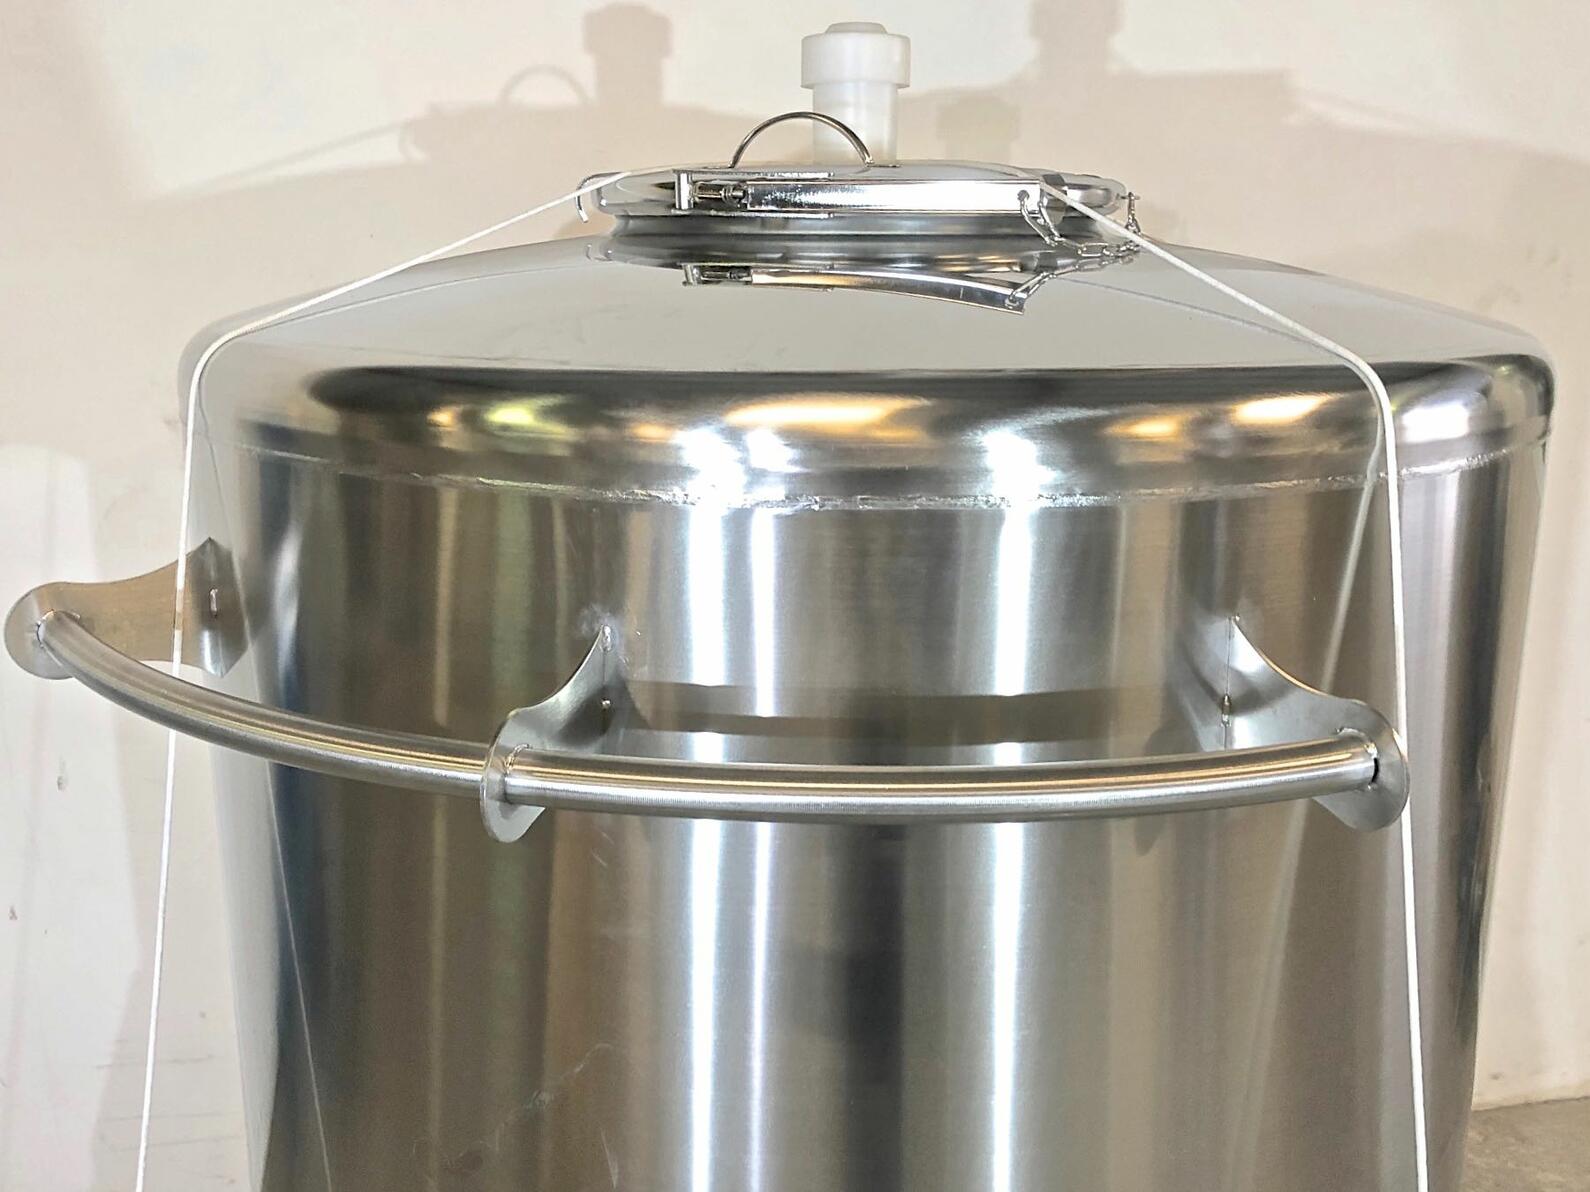 304 stainless steel tank - Model SCL1000